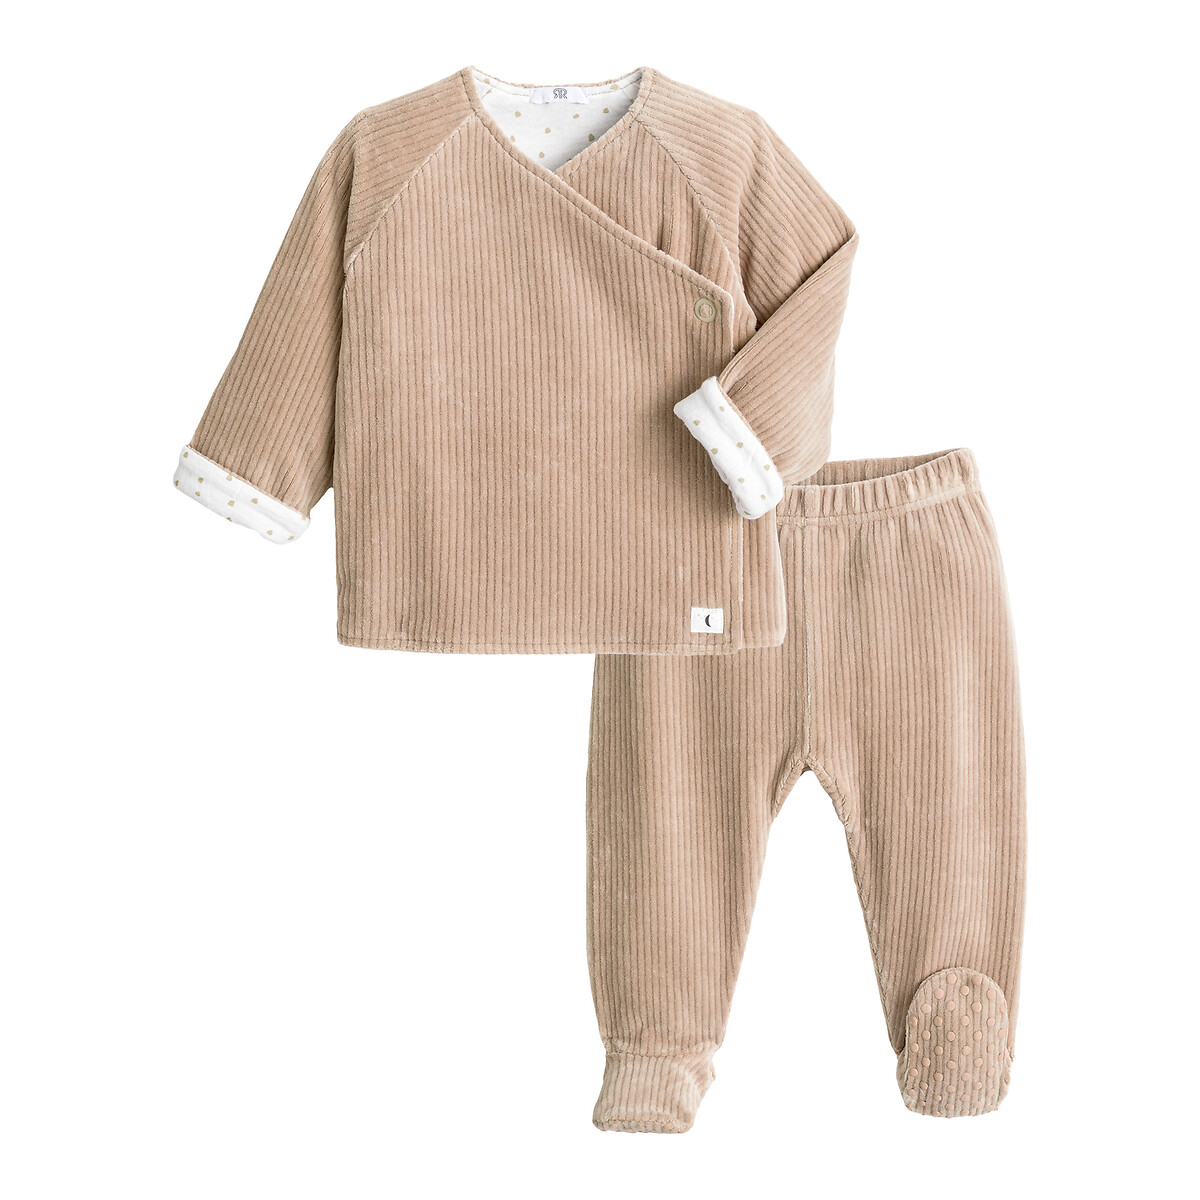 Newborn Baby Boy Outfits & Tracksuits | La Redoute